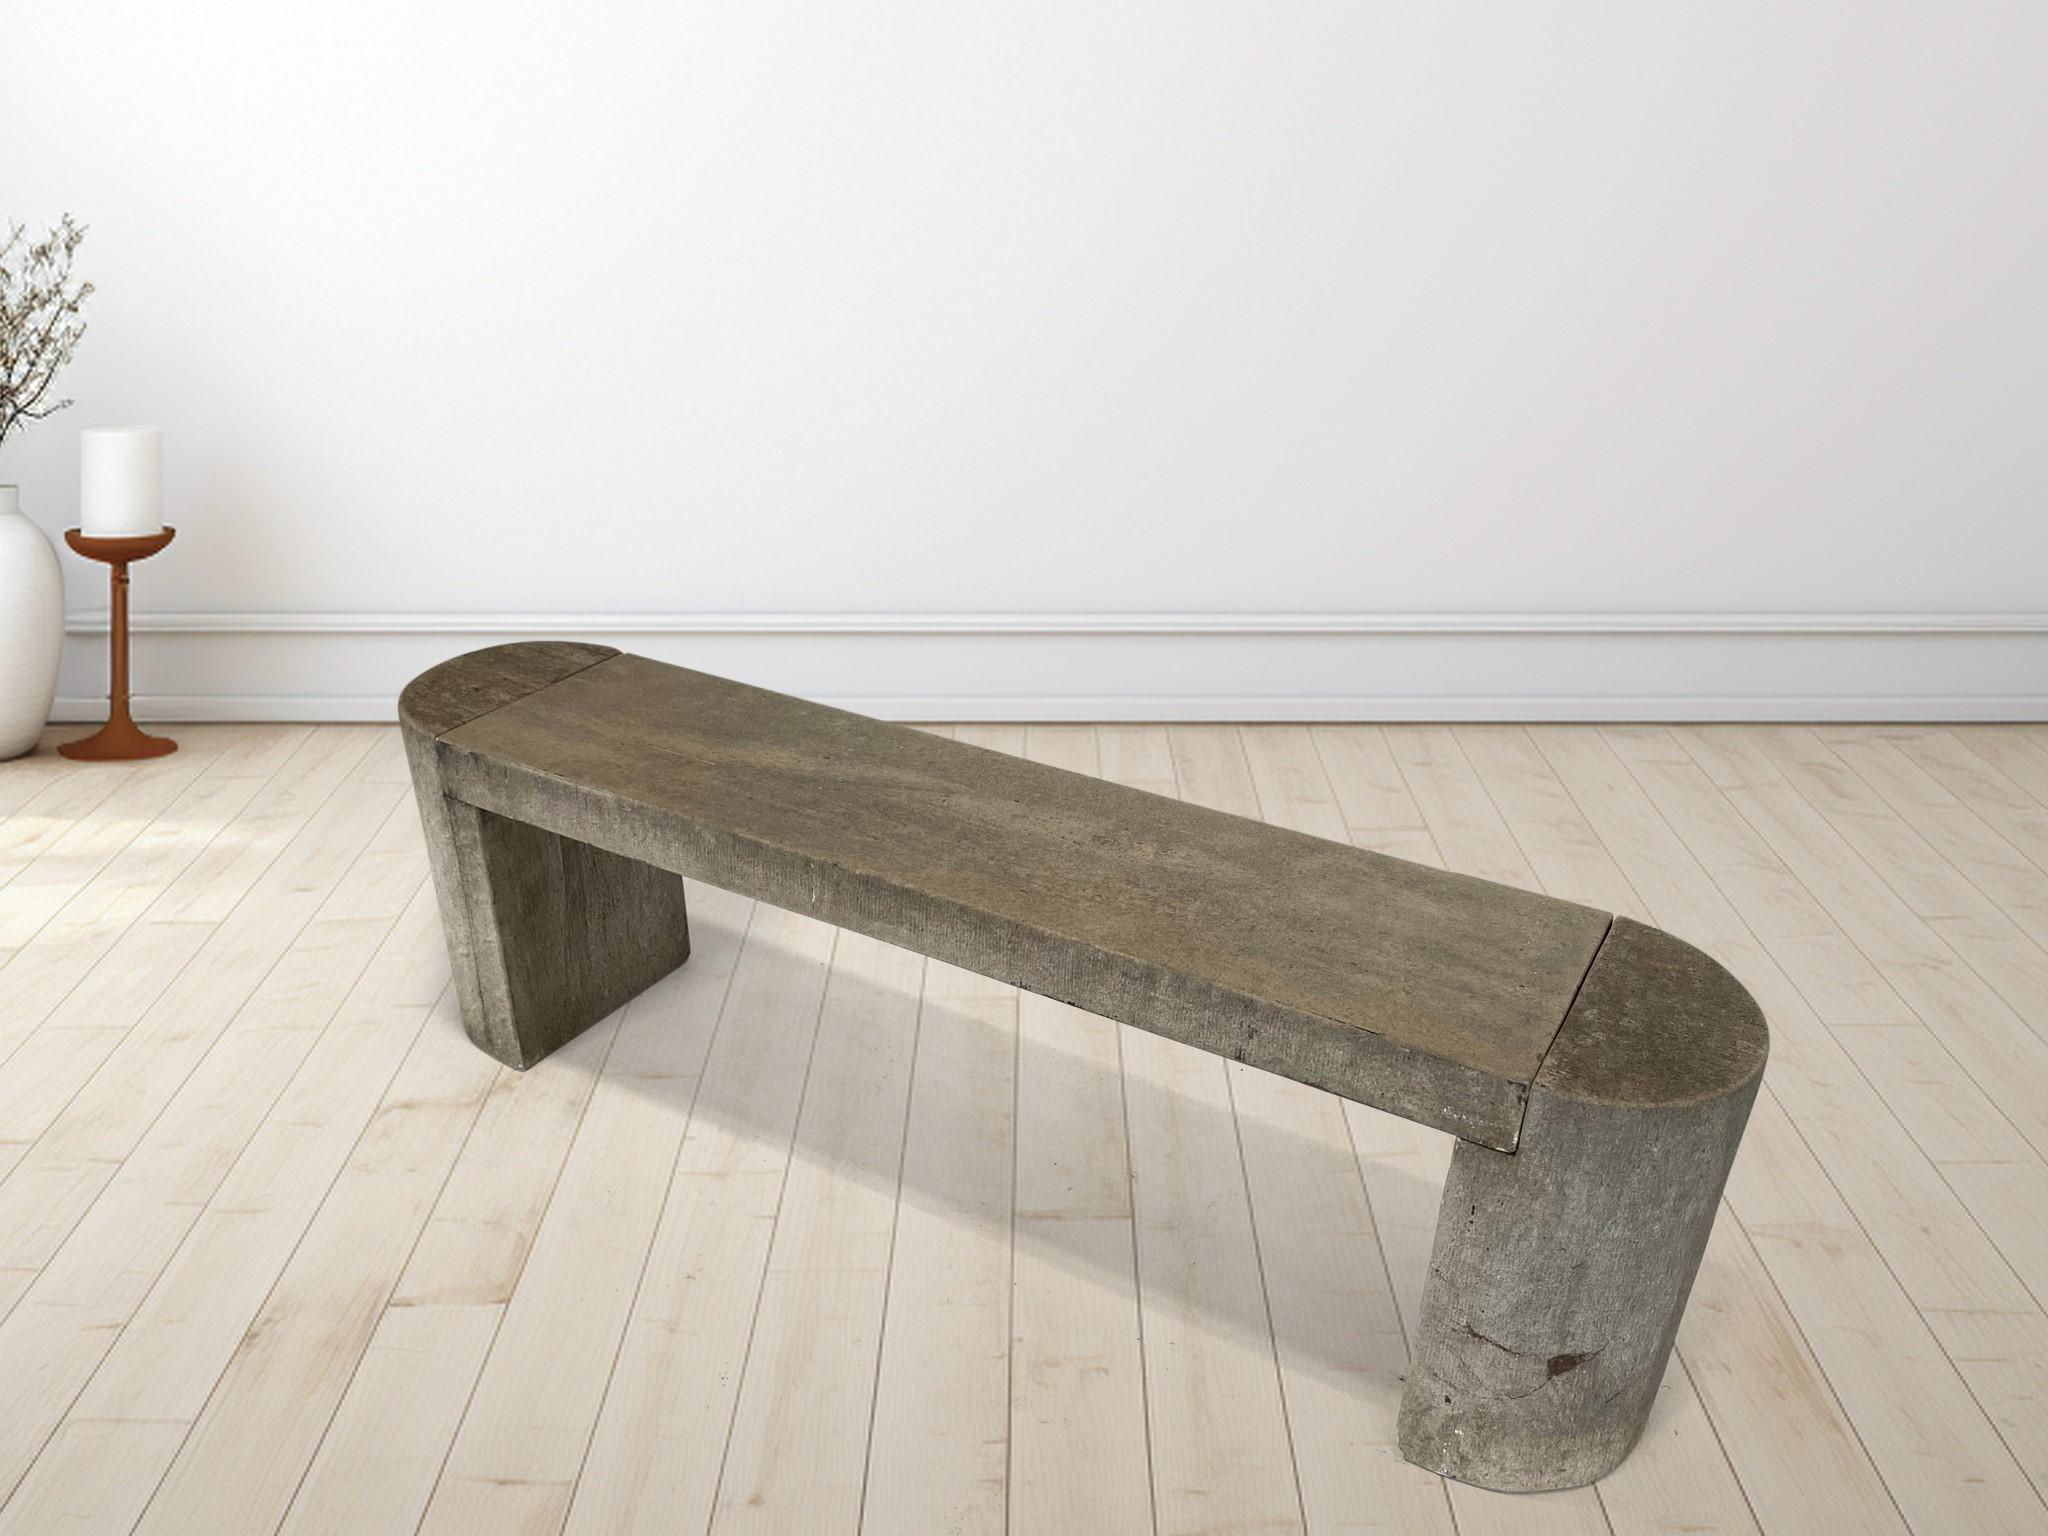 Modernist Polished Stone Concrete Bench Seat with Aged Patina In Good Condition For Sale In Llanbrynmair, GB